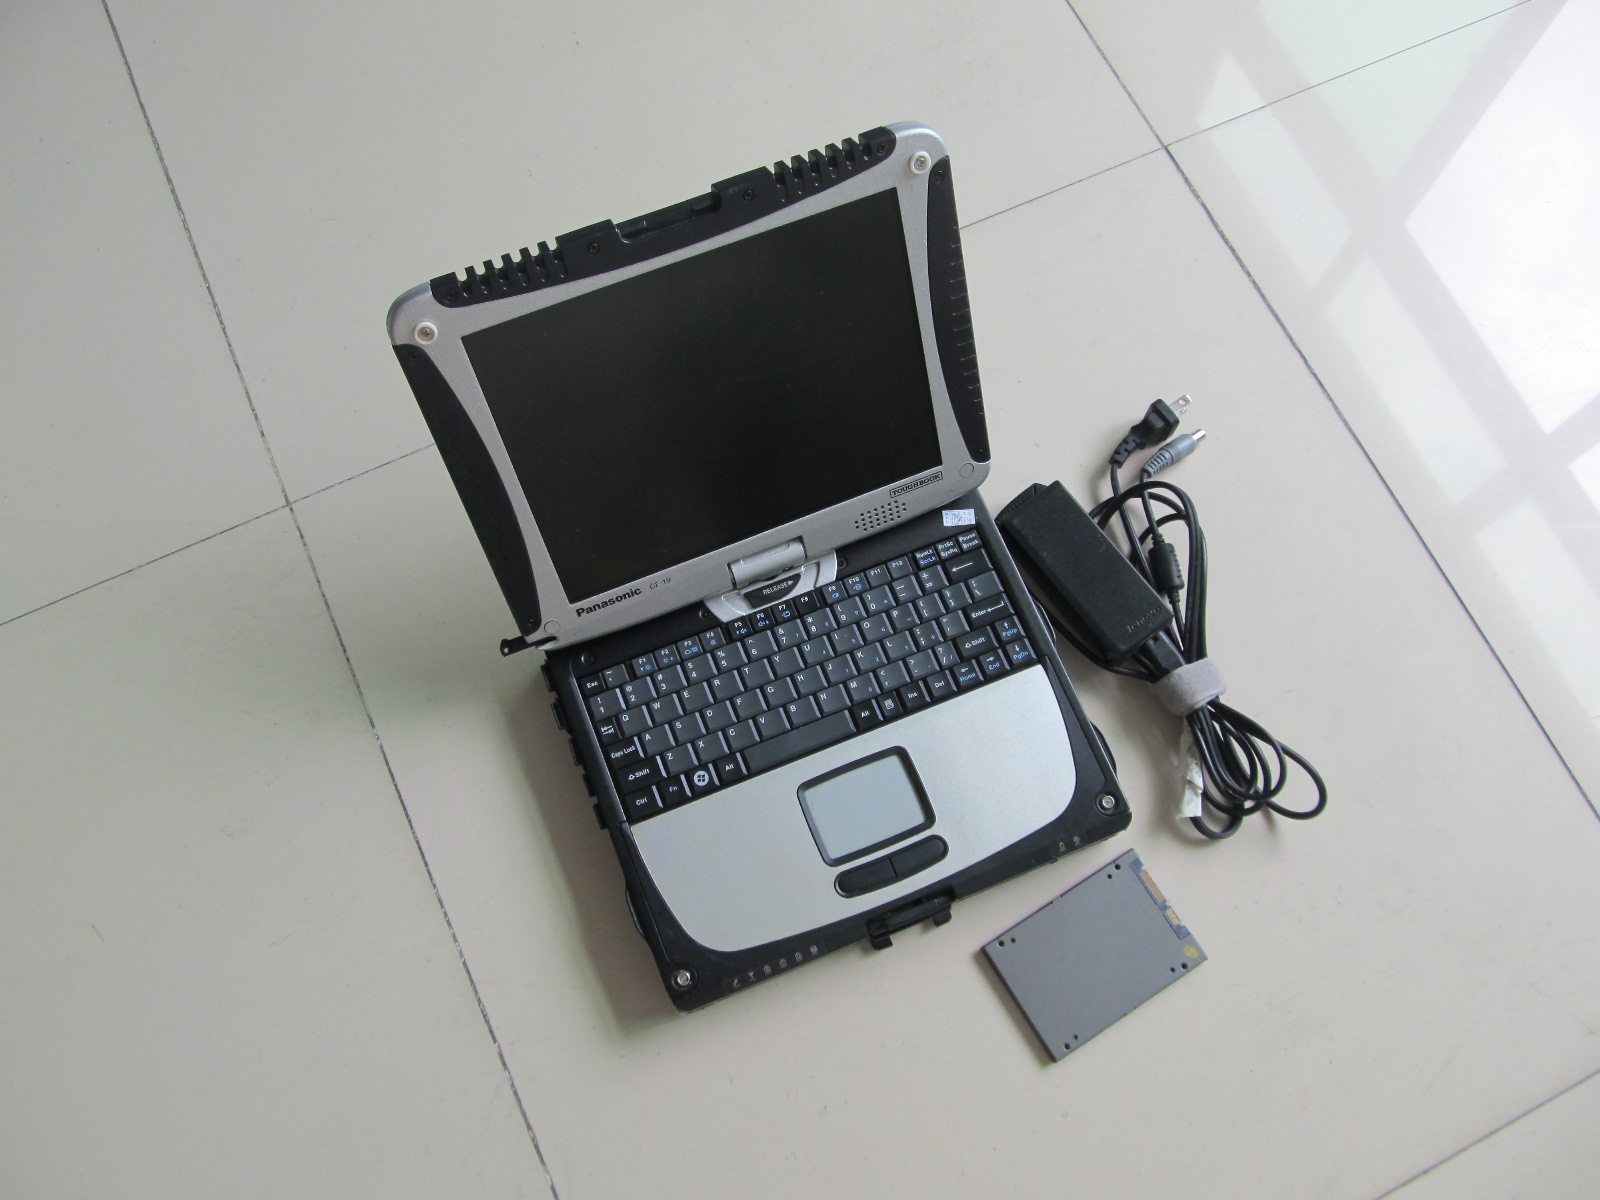 mb star c3 diagnostic tool with laptop cf19 touch screen super ssd toughbook ram 4g ready to use